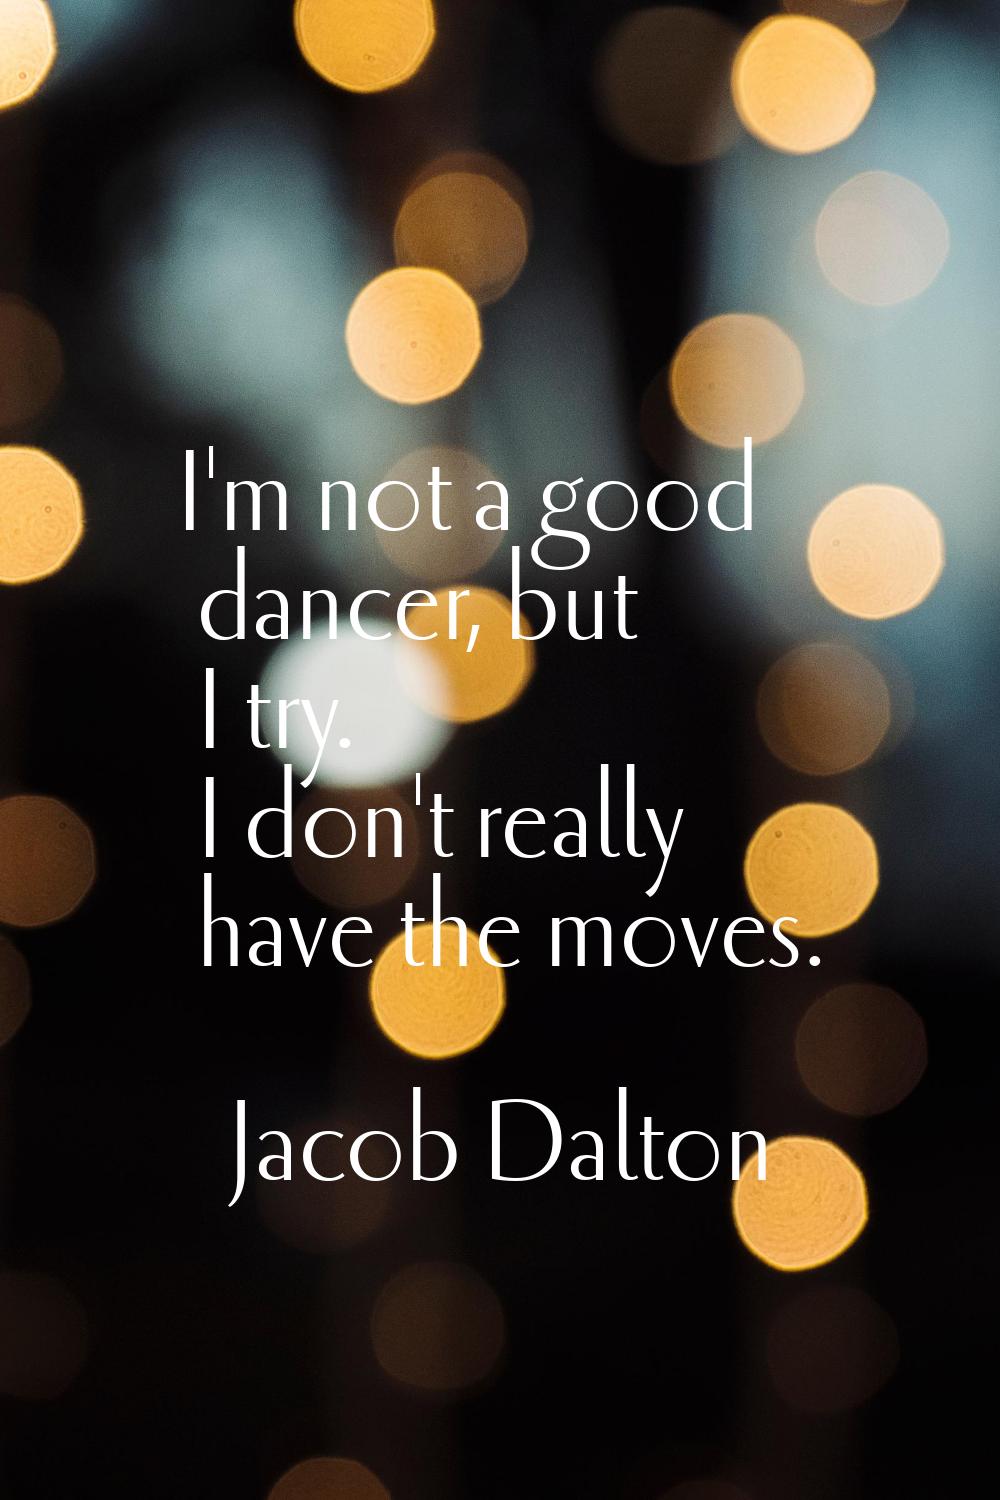 I'm not a good dancer, but I try. I don't really have the moves.